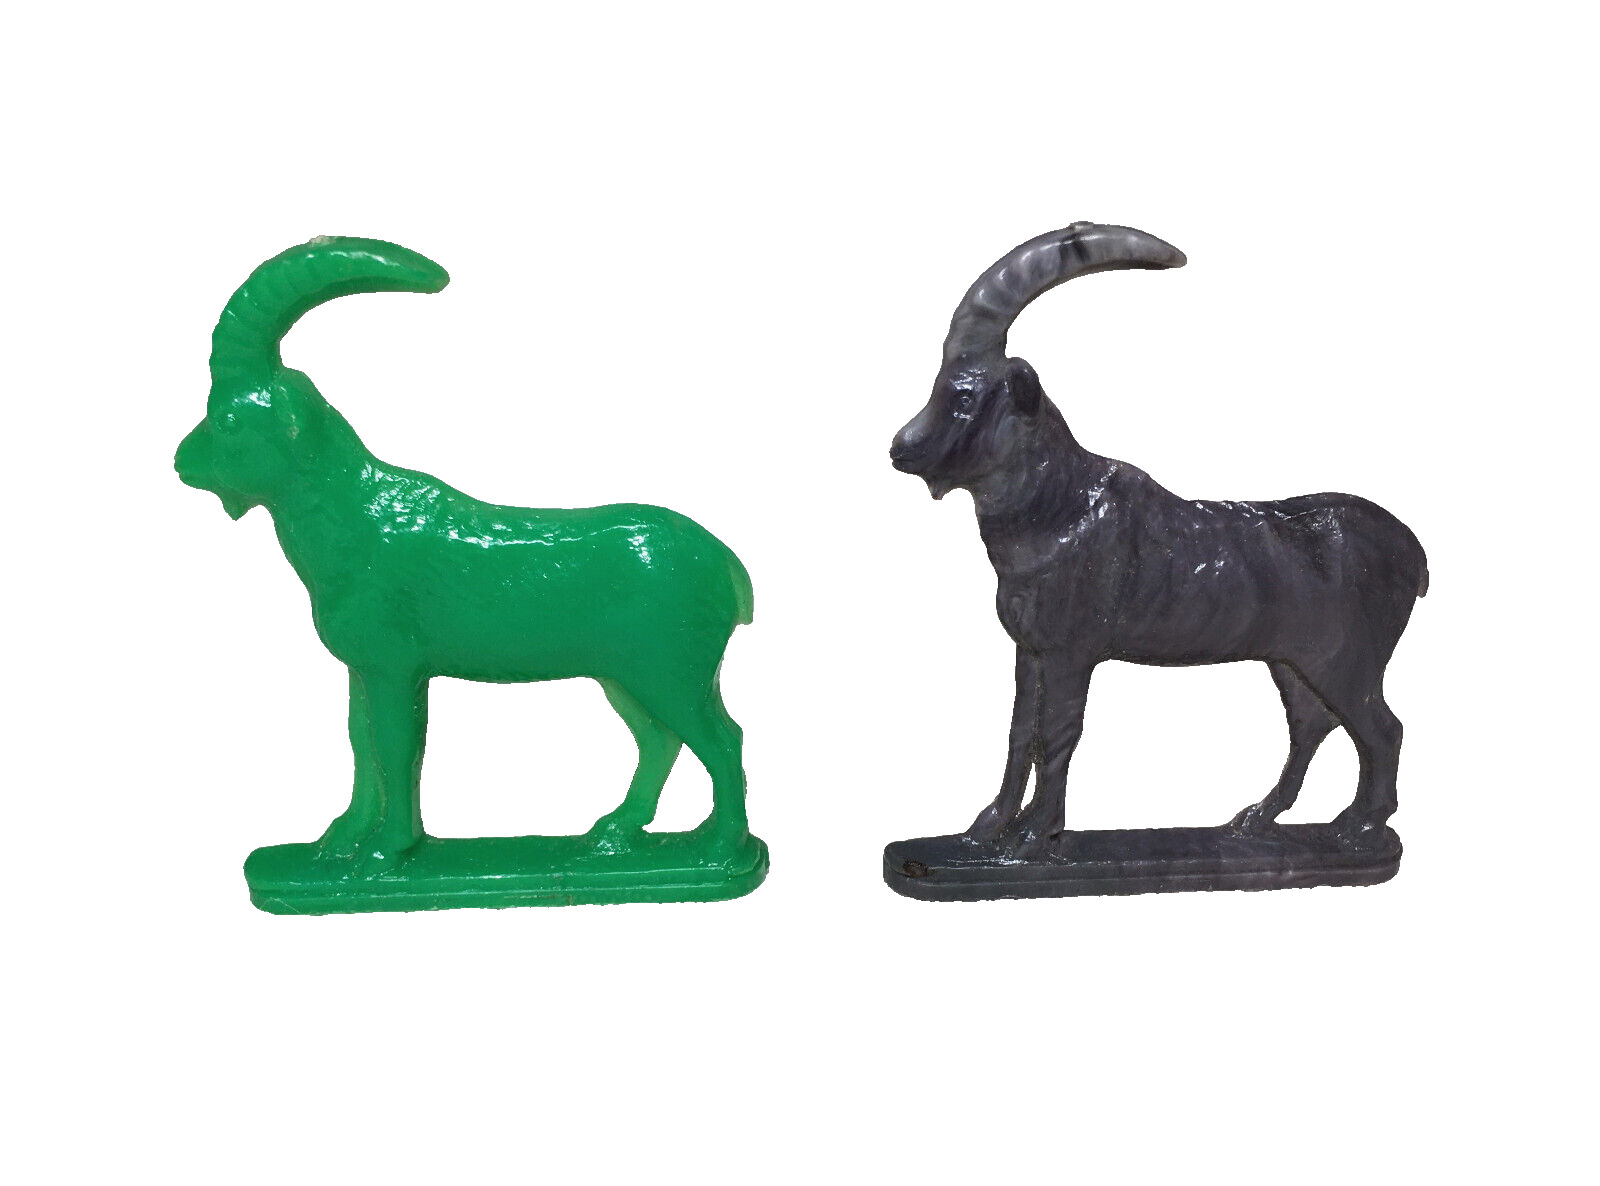 1950s Vintage Cracker Jack Prize Toy Ibex Mountain Goat Stand Up Lot of 2